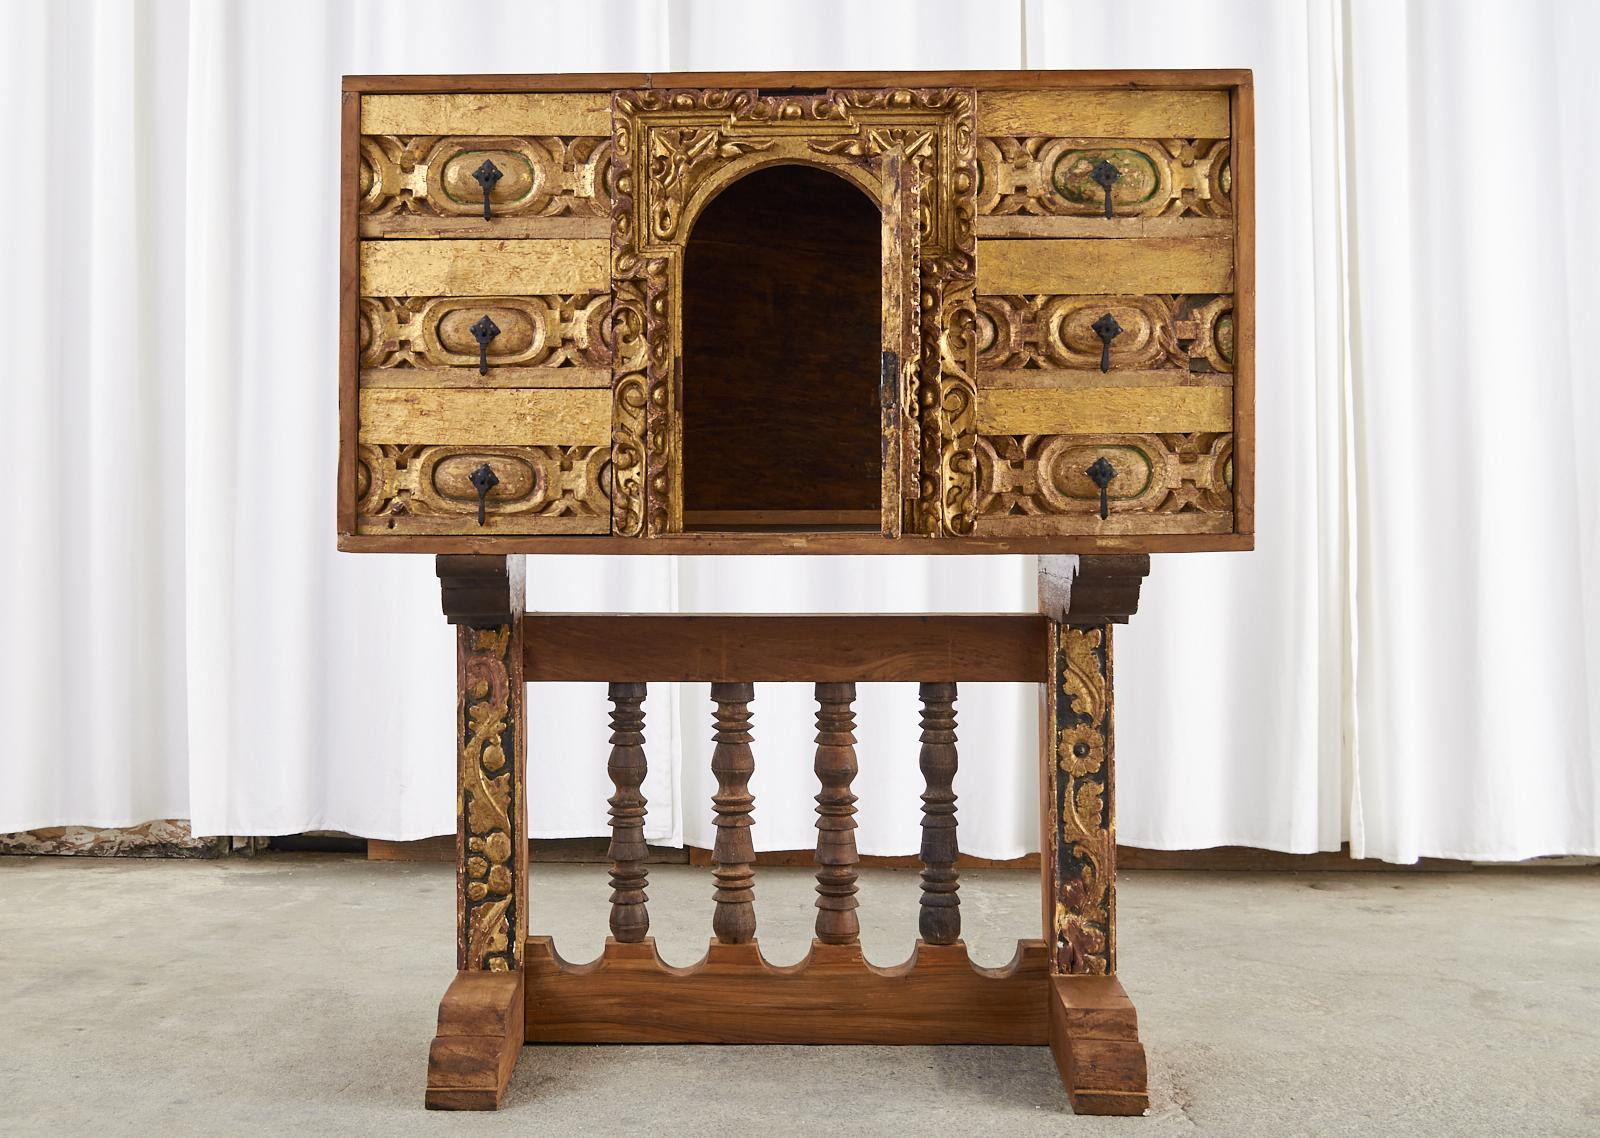 Rustic large Spanish baroque bargueno style cabinet or chest on stand crafted from thick pine. The beautiful case has exposed dove tail joinery and features 6 large storage drawers and is centered by an arched storage door with an ornate carved